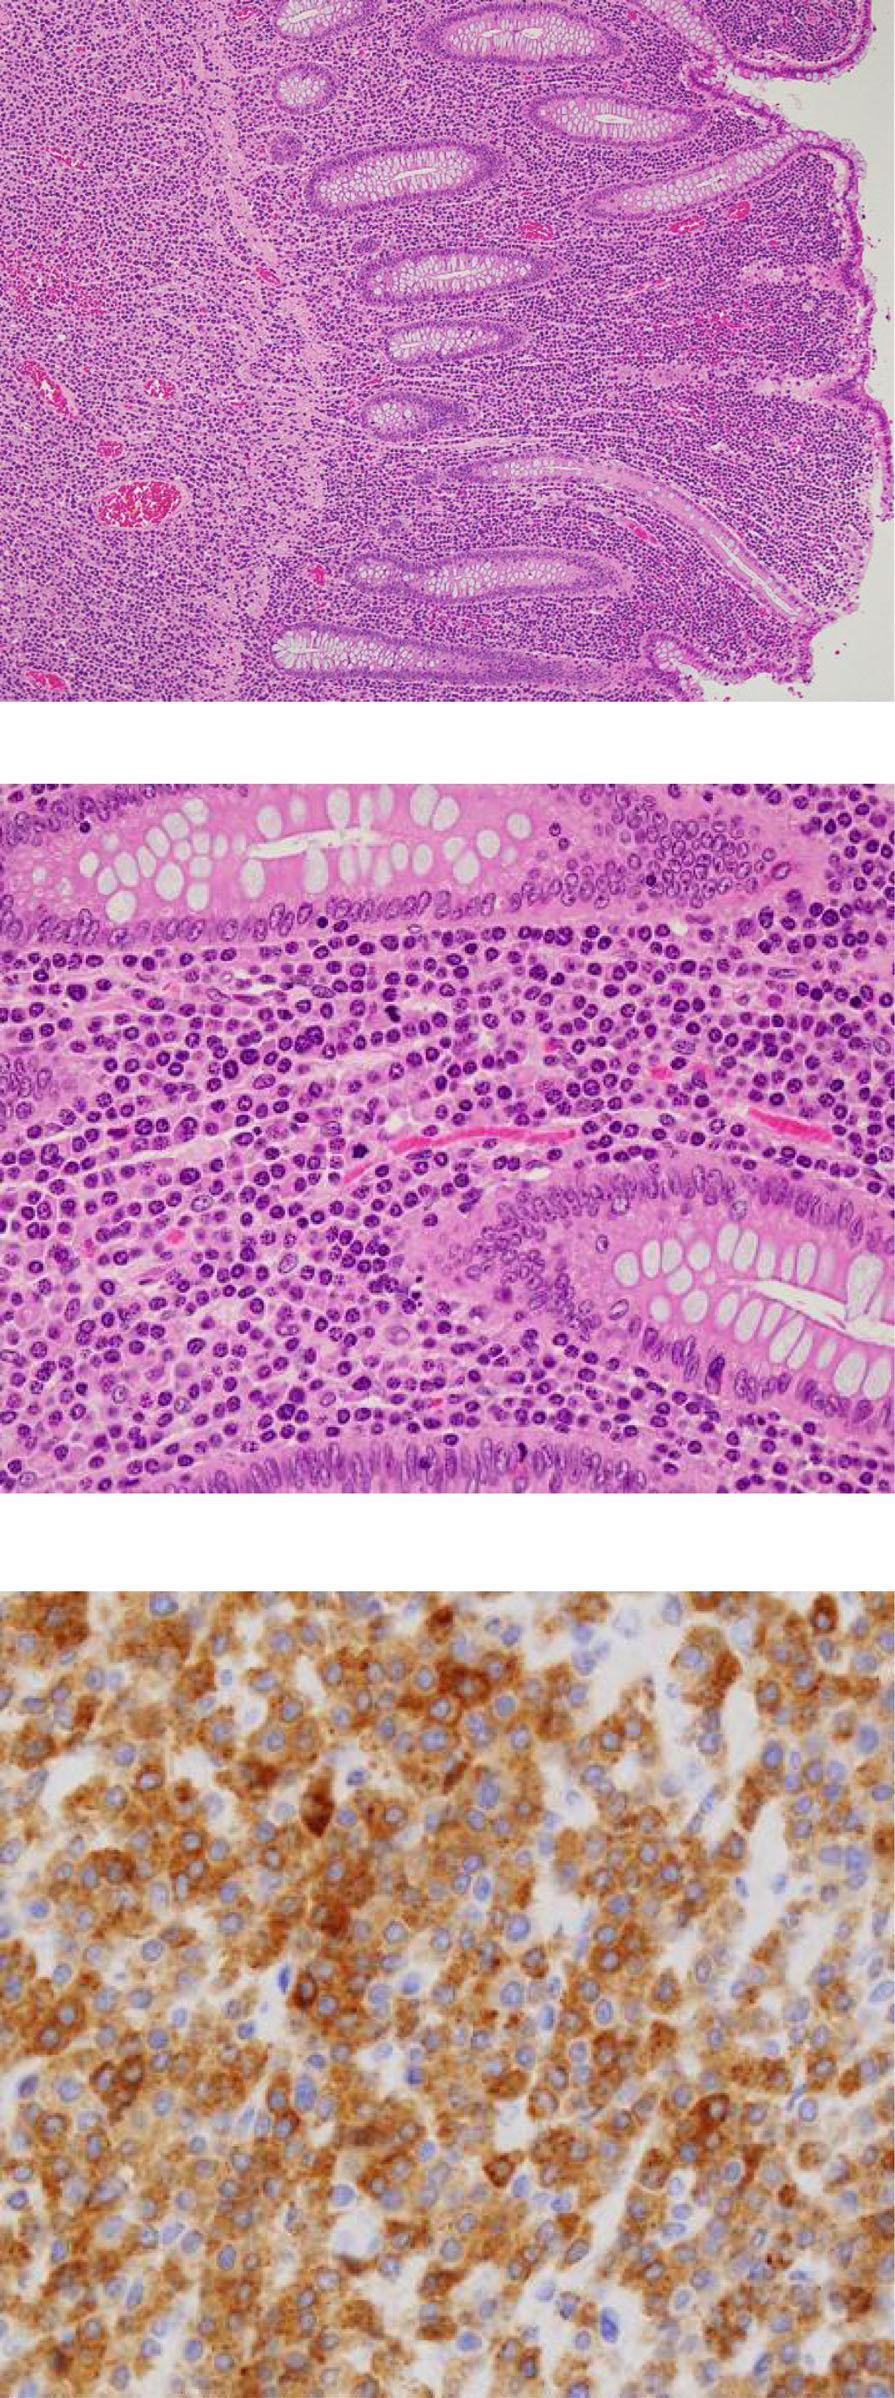 Kitmur et l. Surgicl Cse Reports (2018) 4:28 Pge 3 of 5 c Fig. 4 Immunohistochemicl exmintion., In situ hyridiztion shows tht most of the tumor expresses immunogloulin G nd lmd light chin mrna.